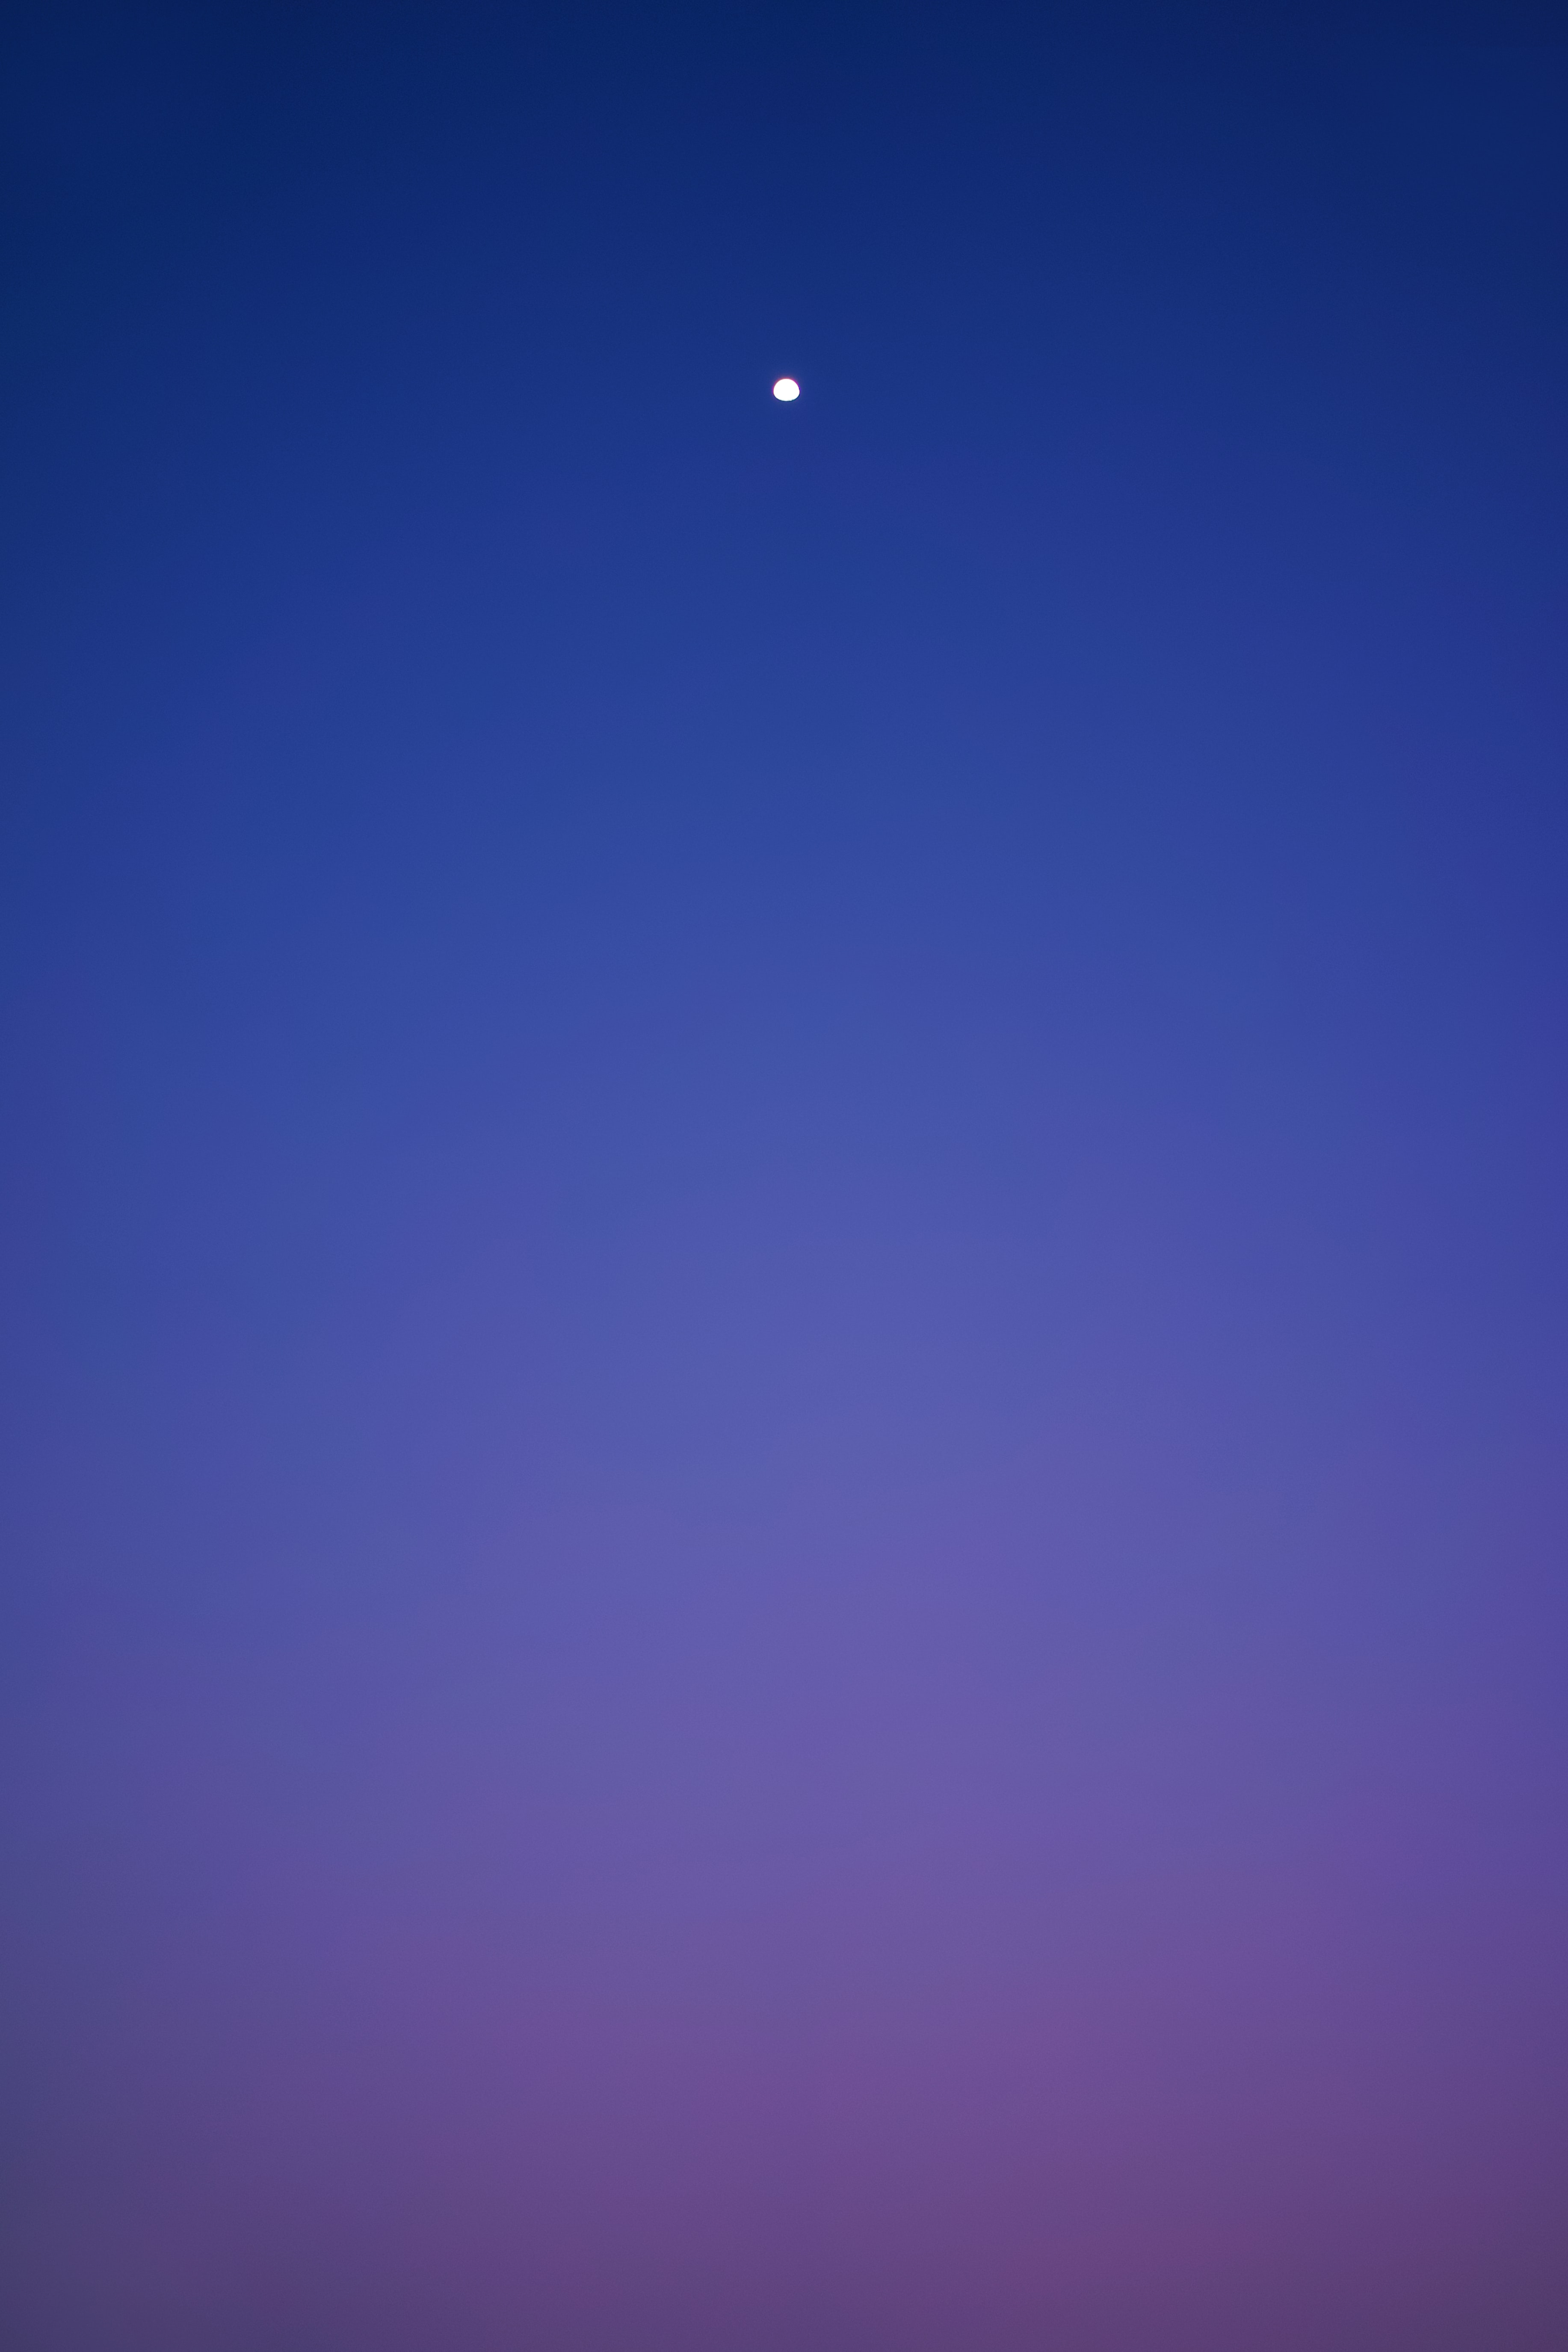 59900 download wallpaper gradient, sky, moon, minimalism, evening screensavers and pictures for free